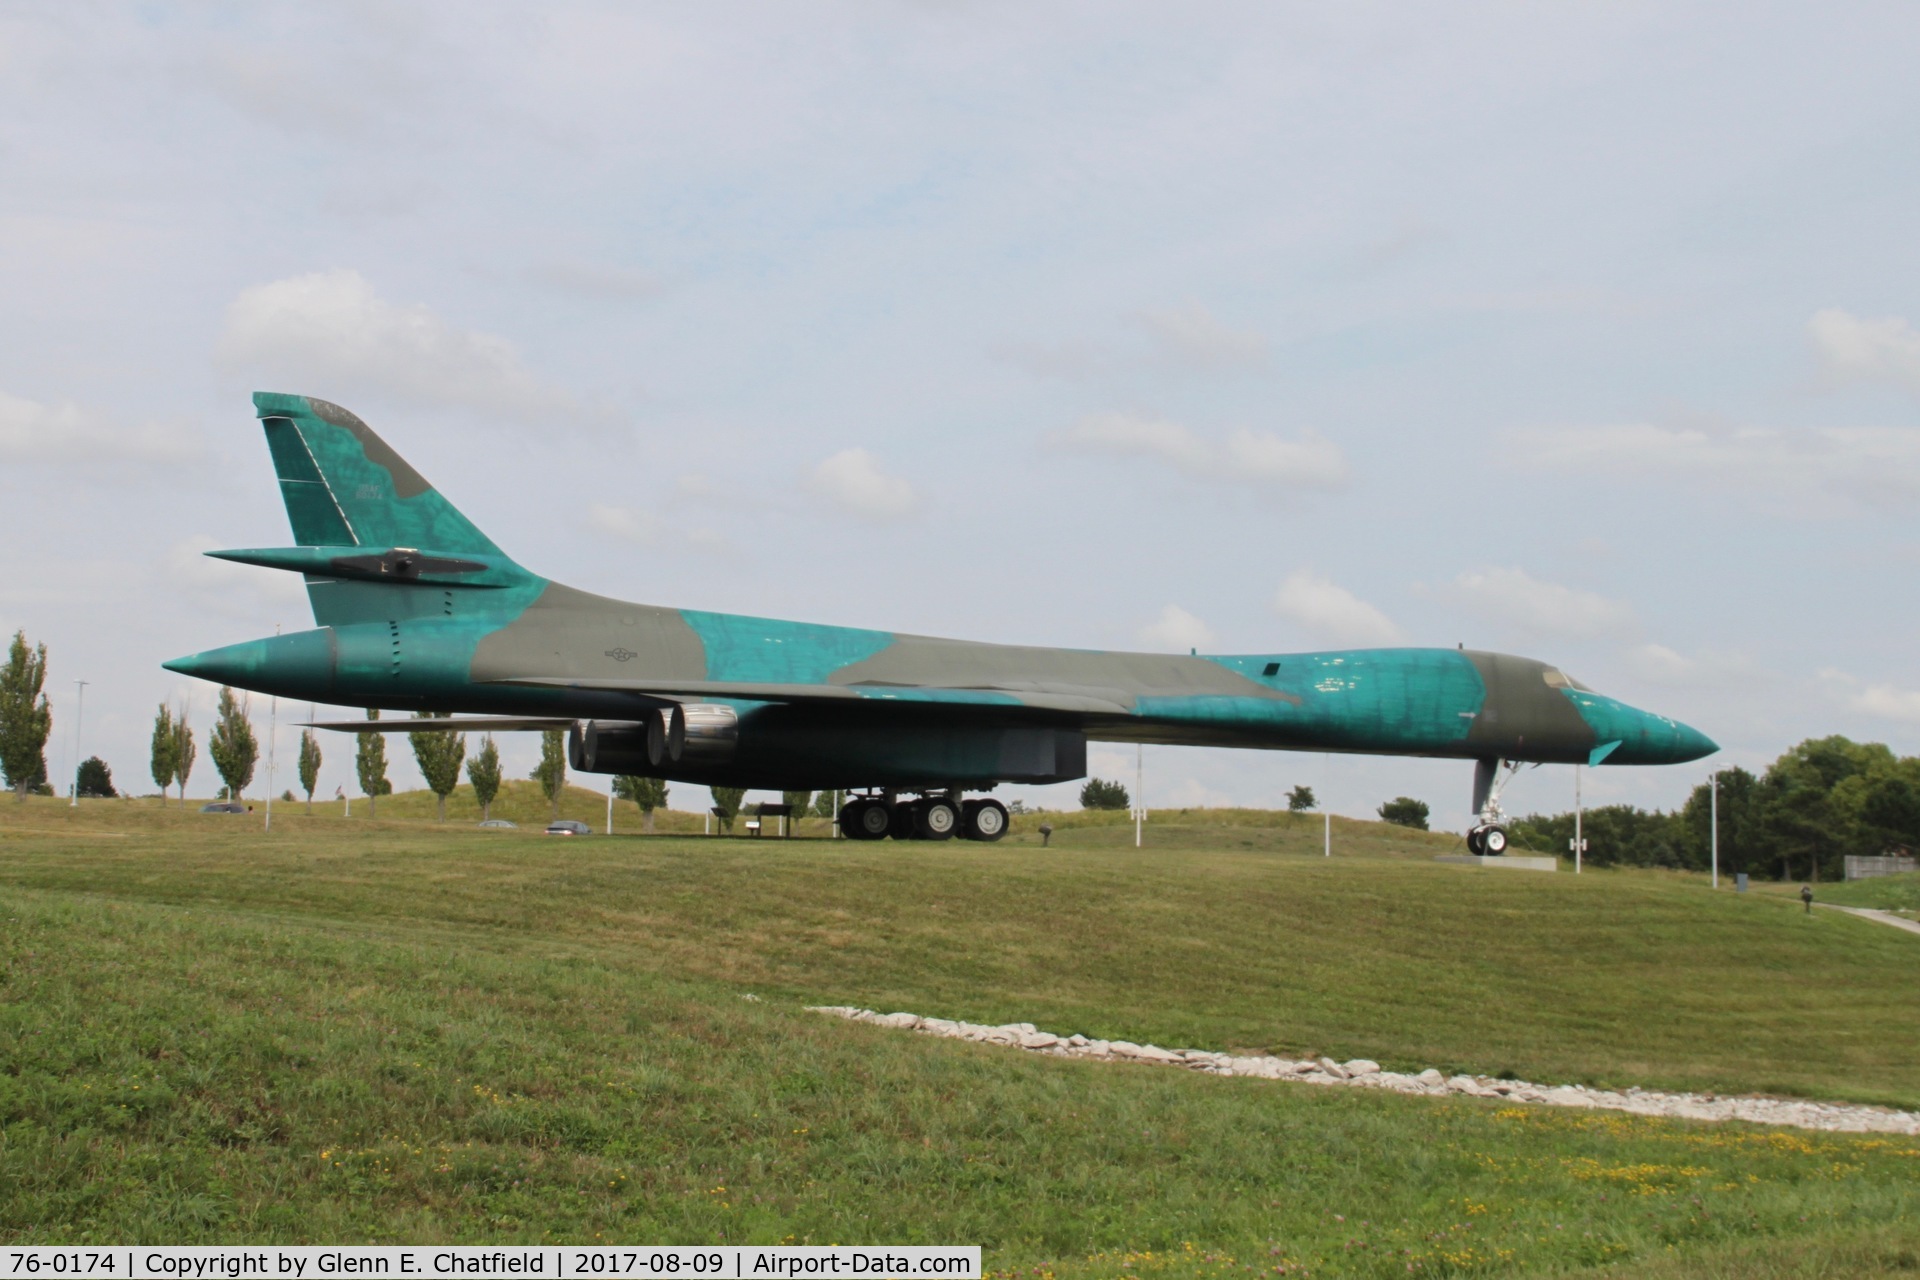 76-0174, 1976 Rockwell B-1A Lancer C/N 004, Needs lots of work!